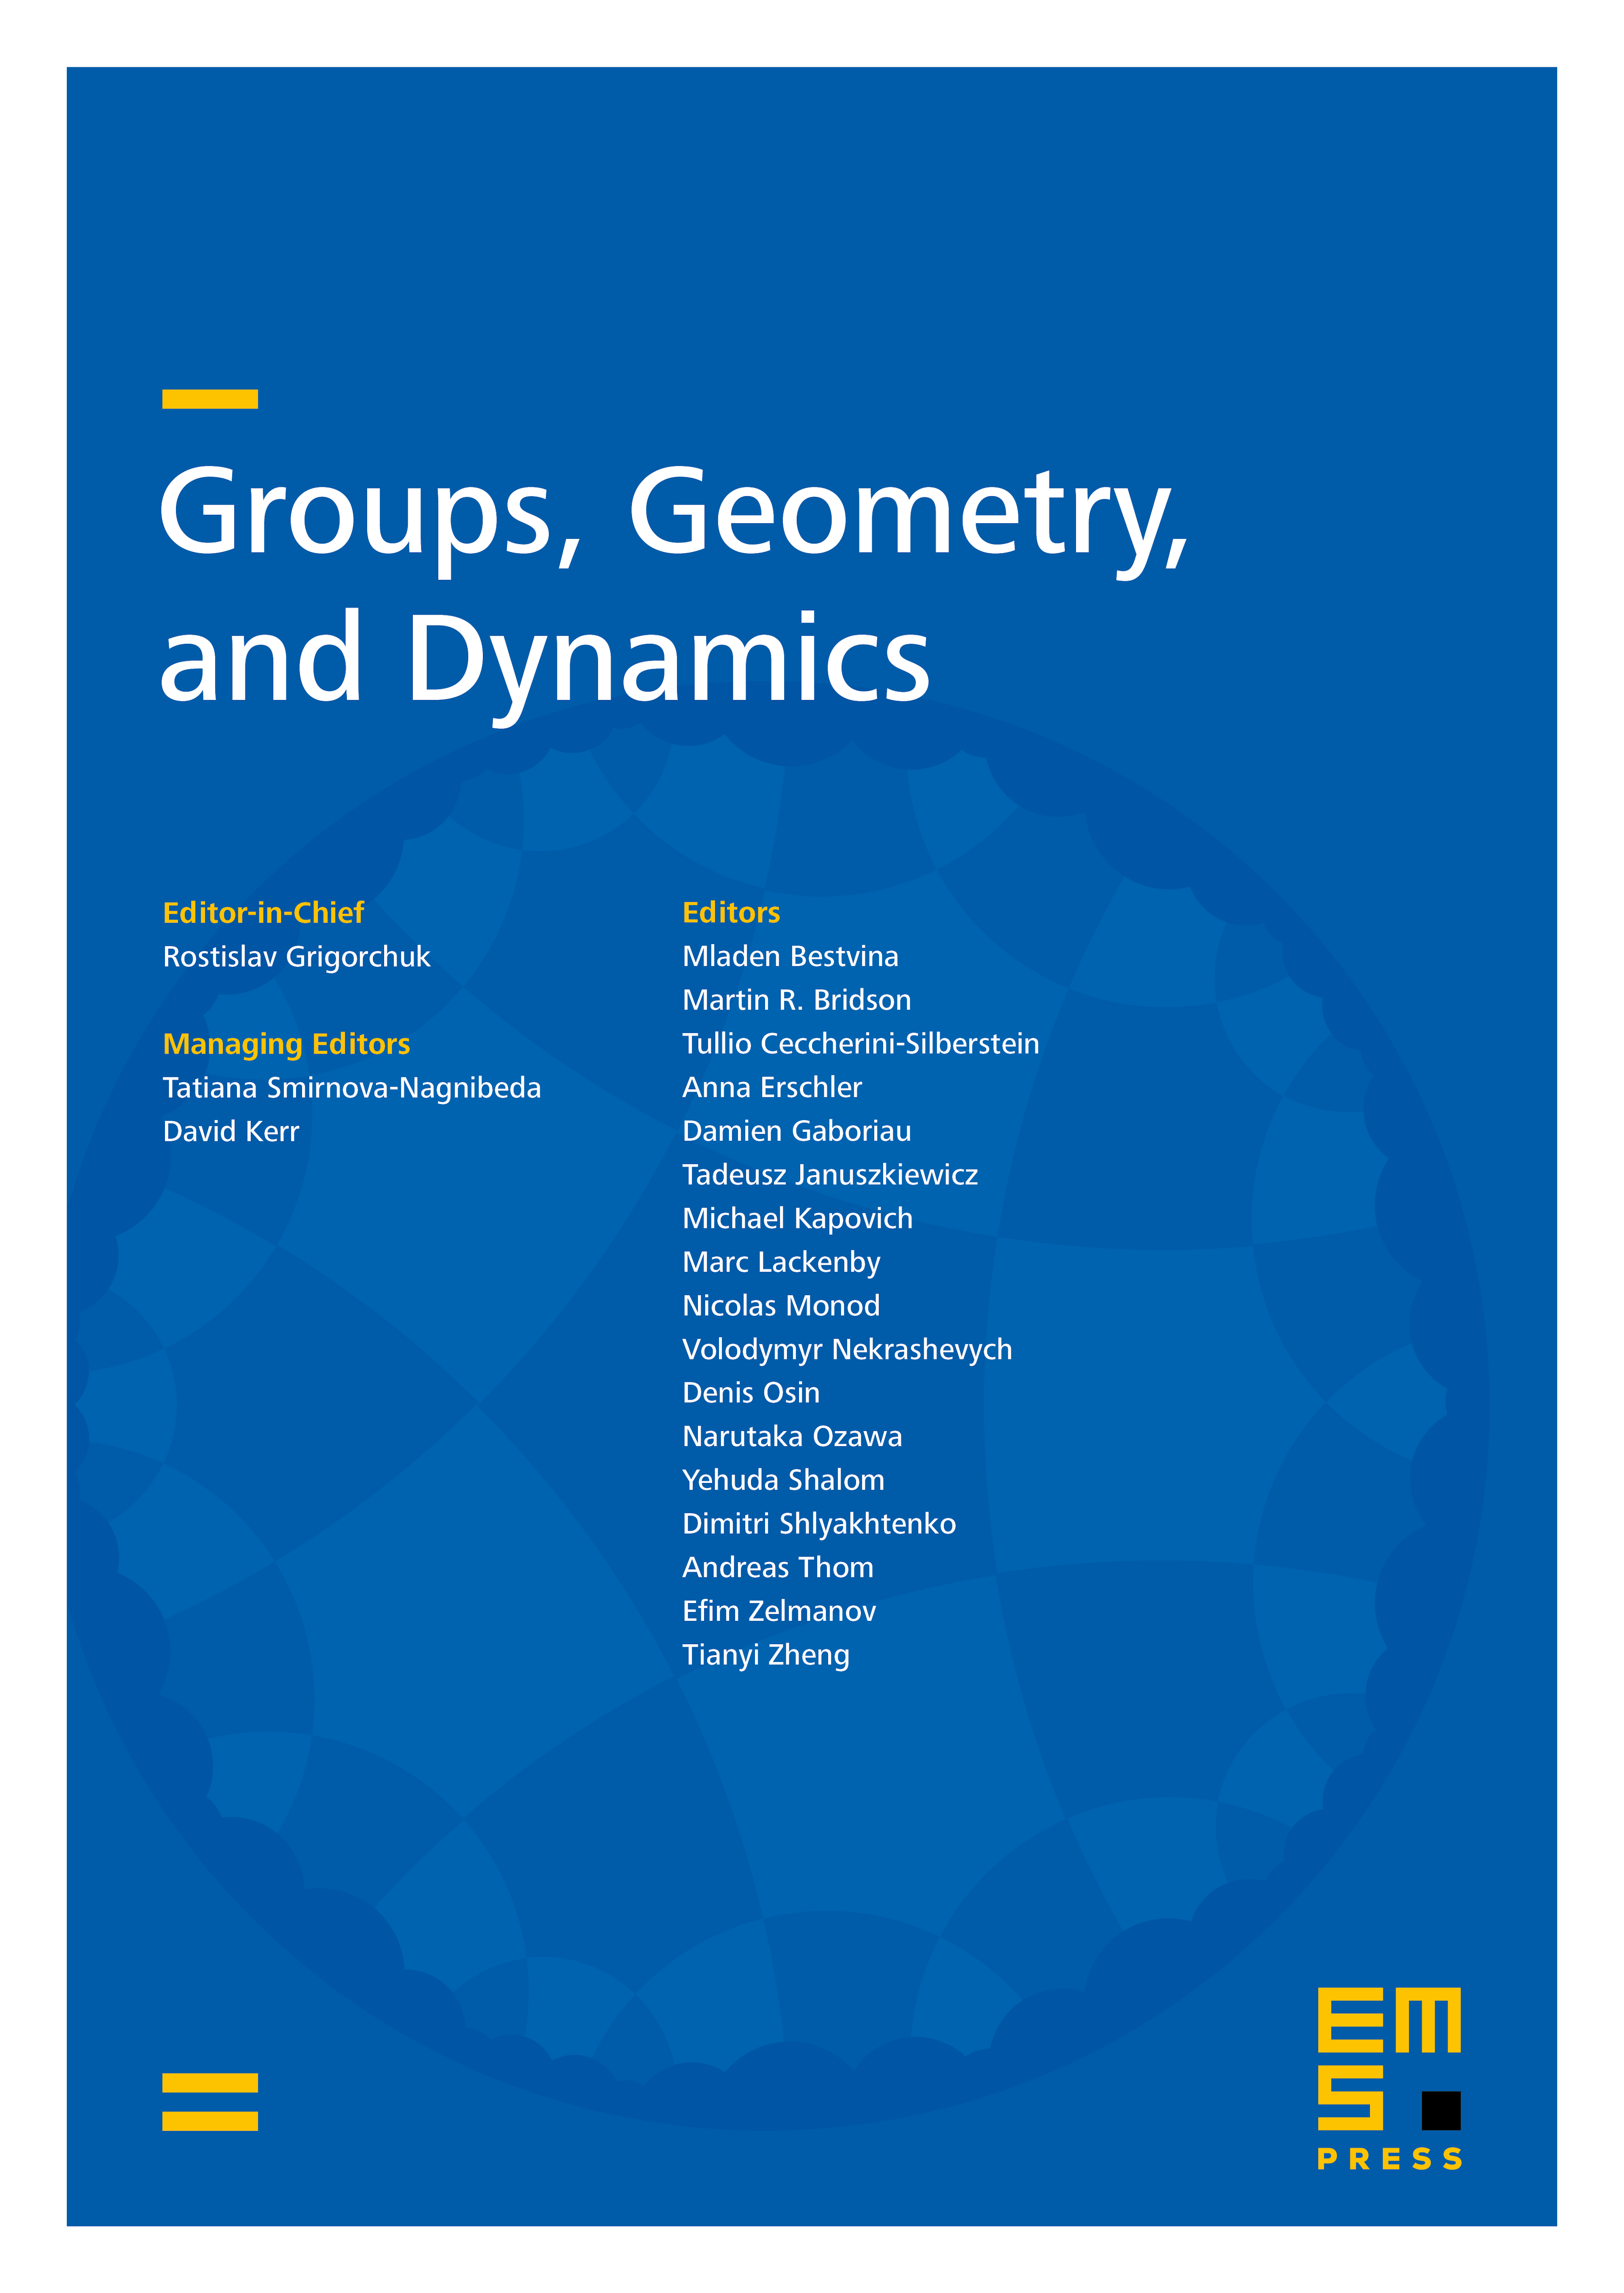 Geometric characterization of flat groups of automorphisms cover